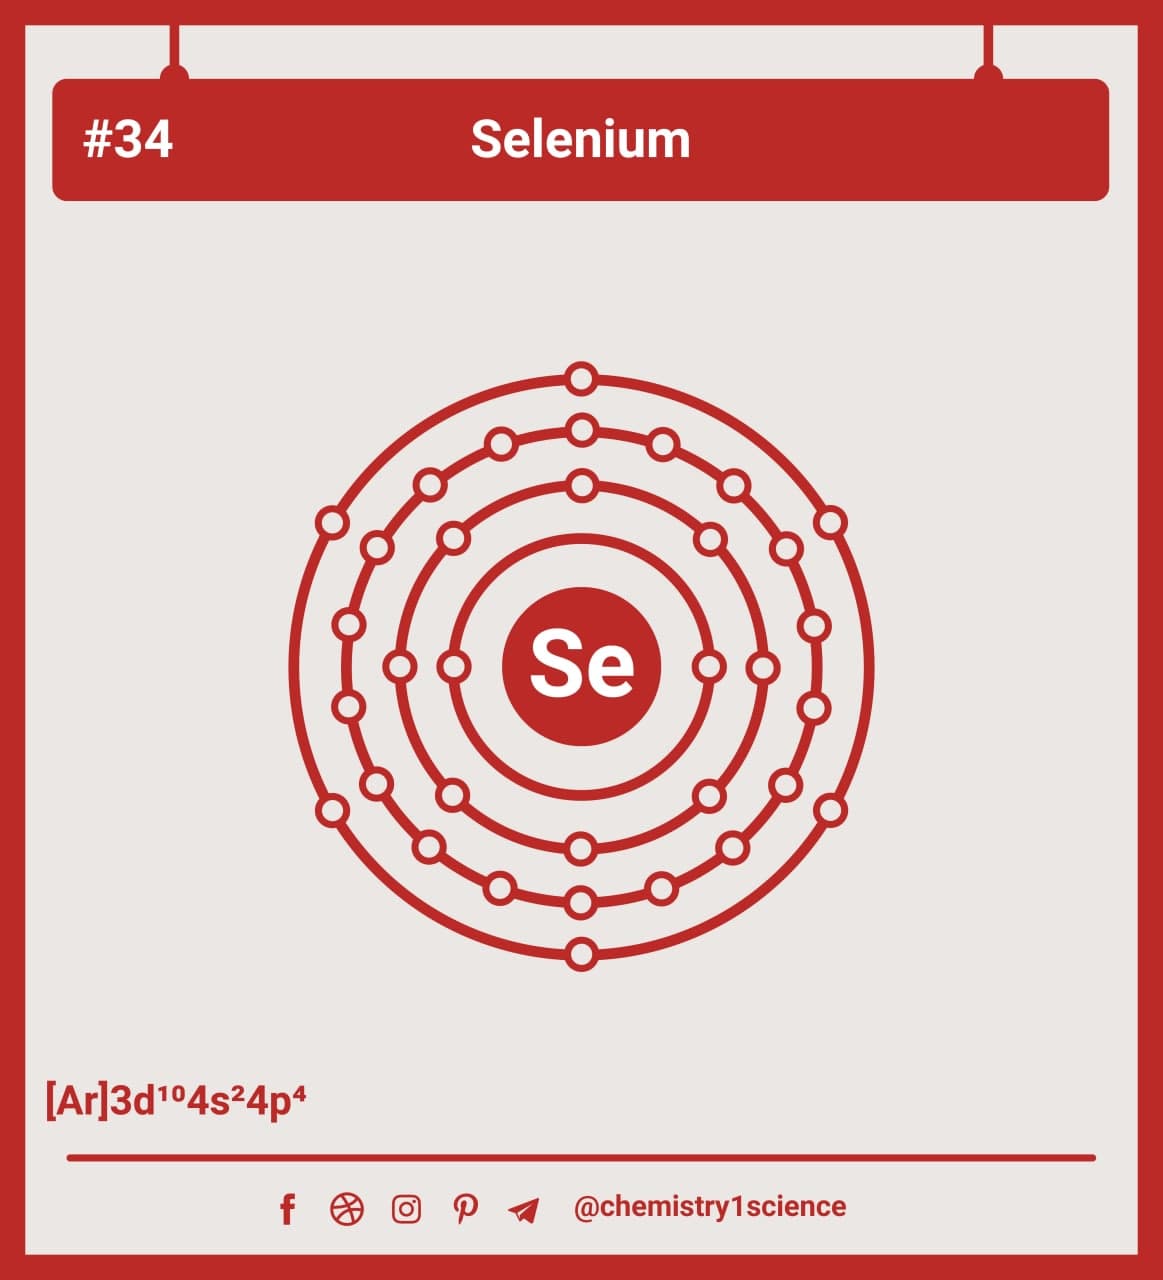 Atom Diagrams Showing Electron Shell Configurations of the Selenium